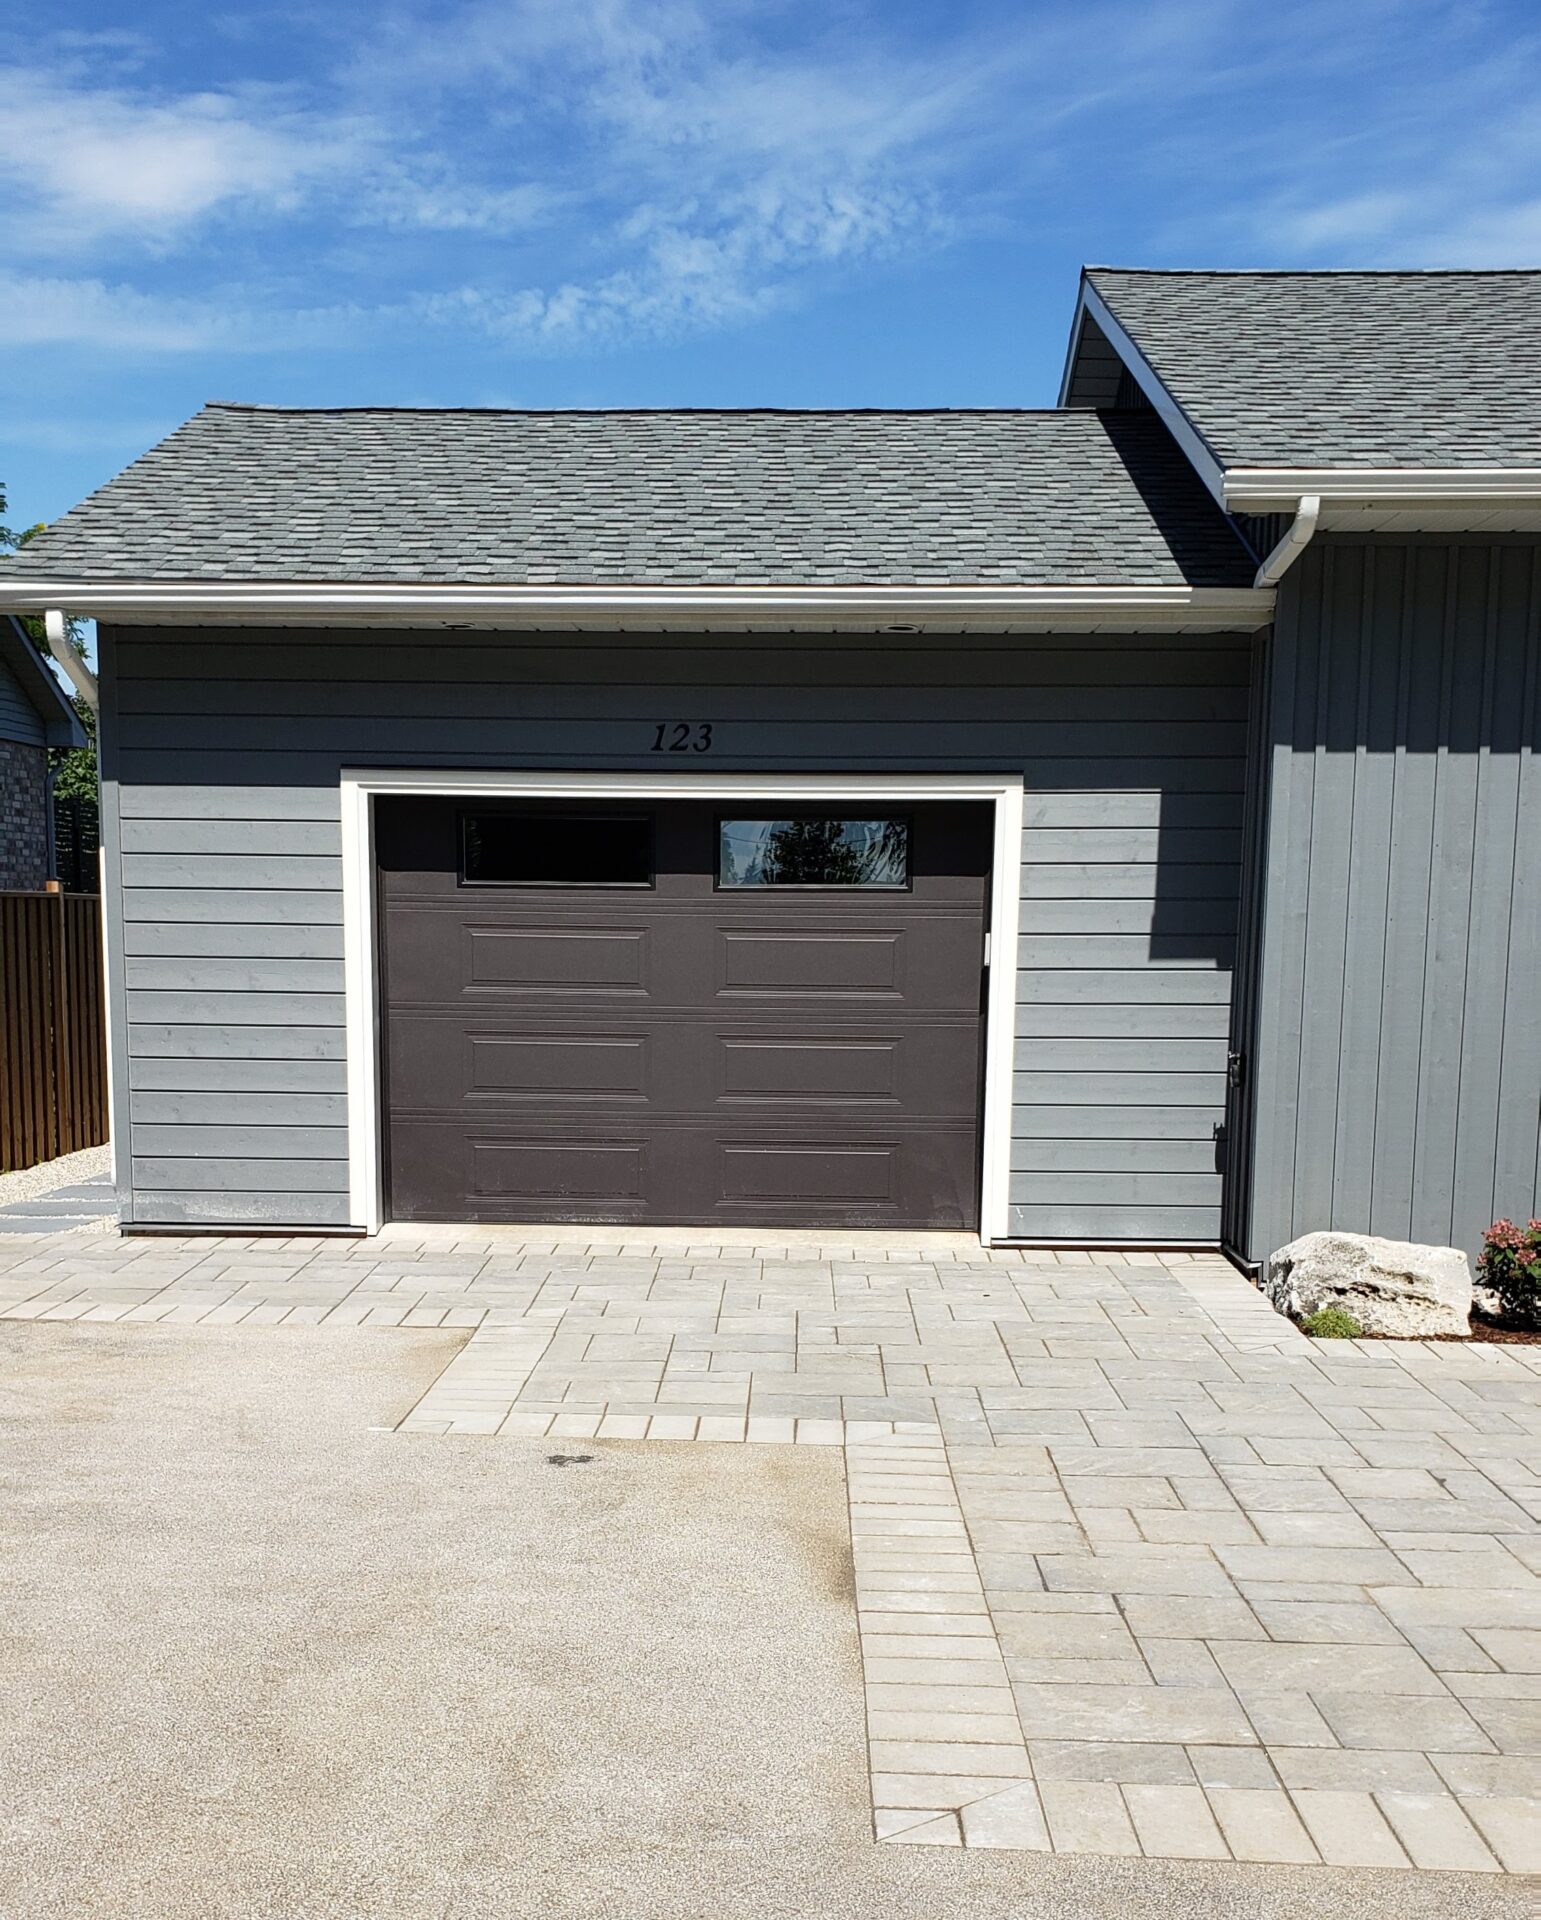 This image shows a grey detached garage with a dark garage door featuring small windows and house number 